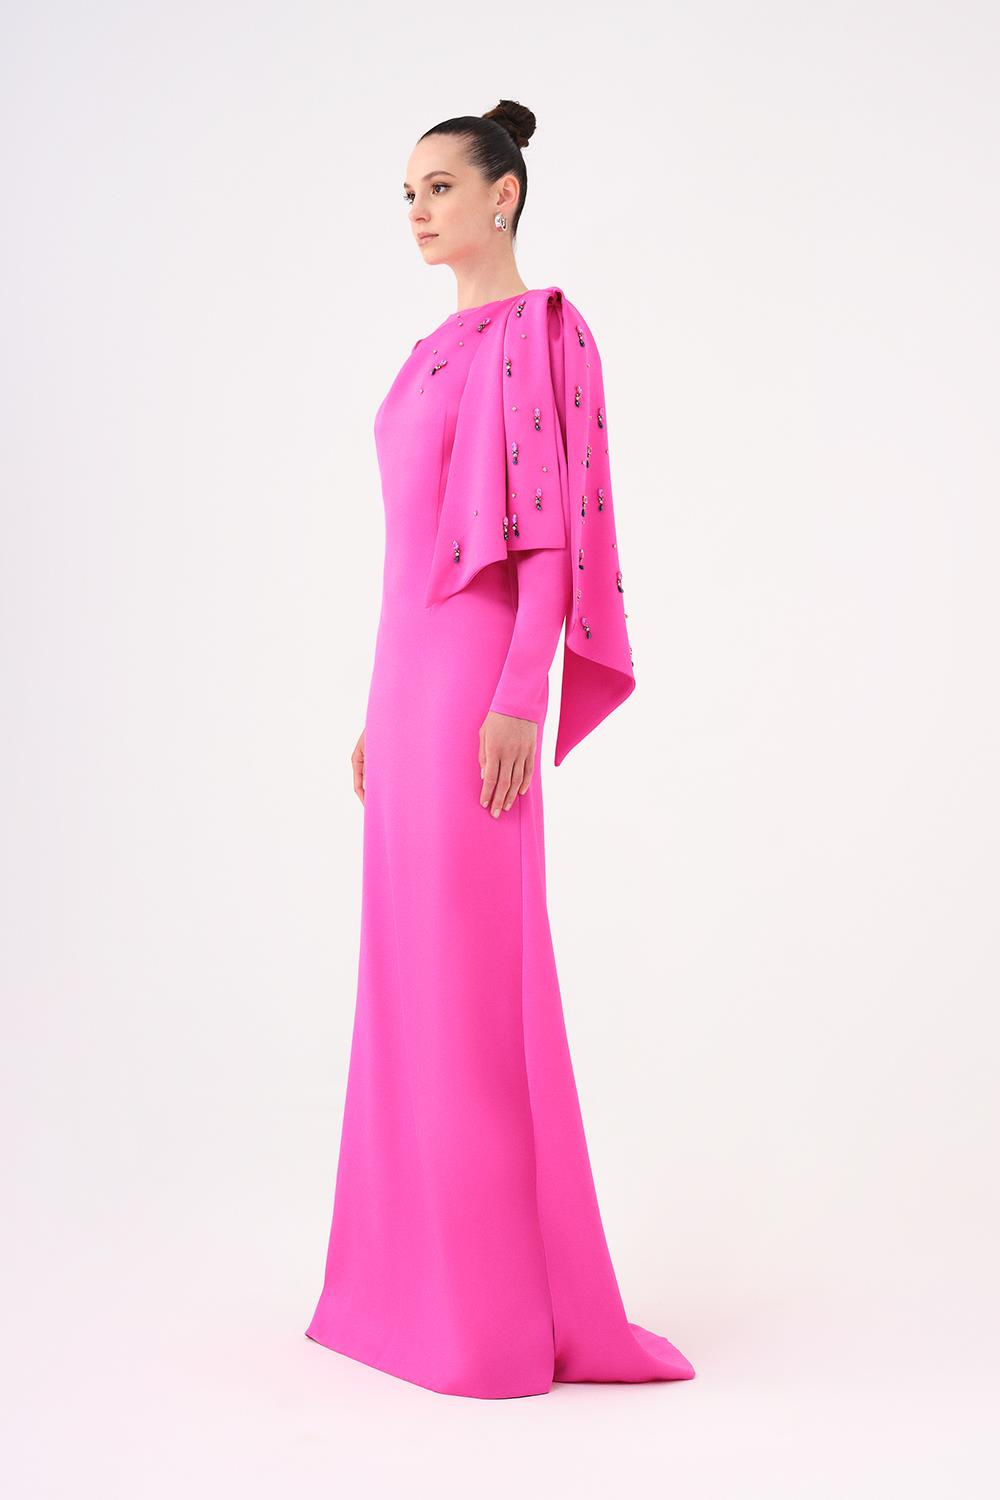 Narrow Cut Stone Embroidered Crepe Long Evening Dress